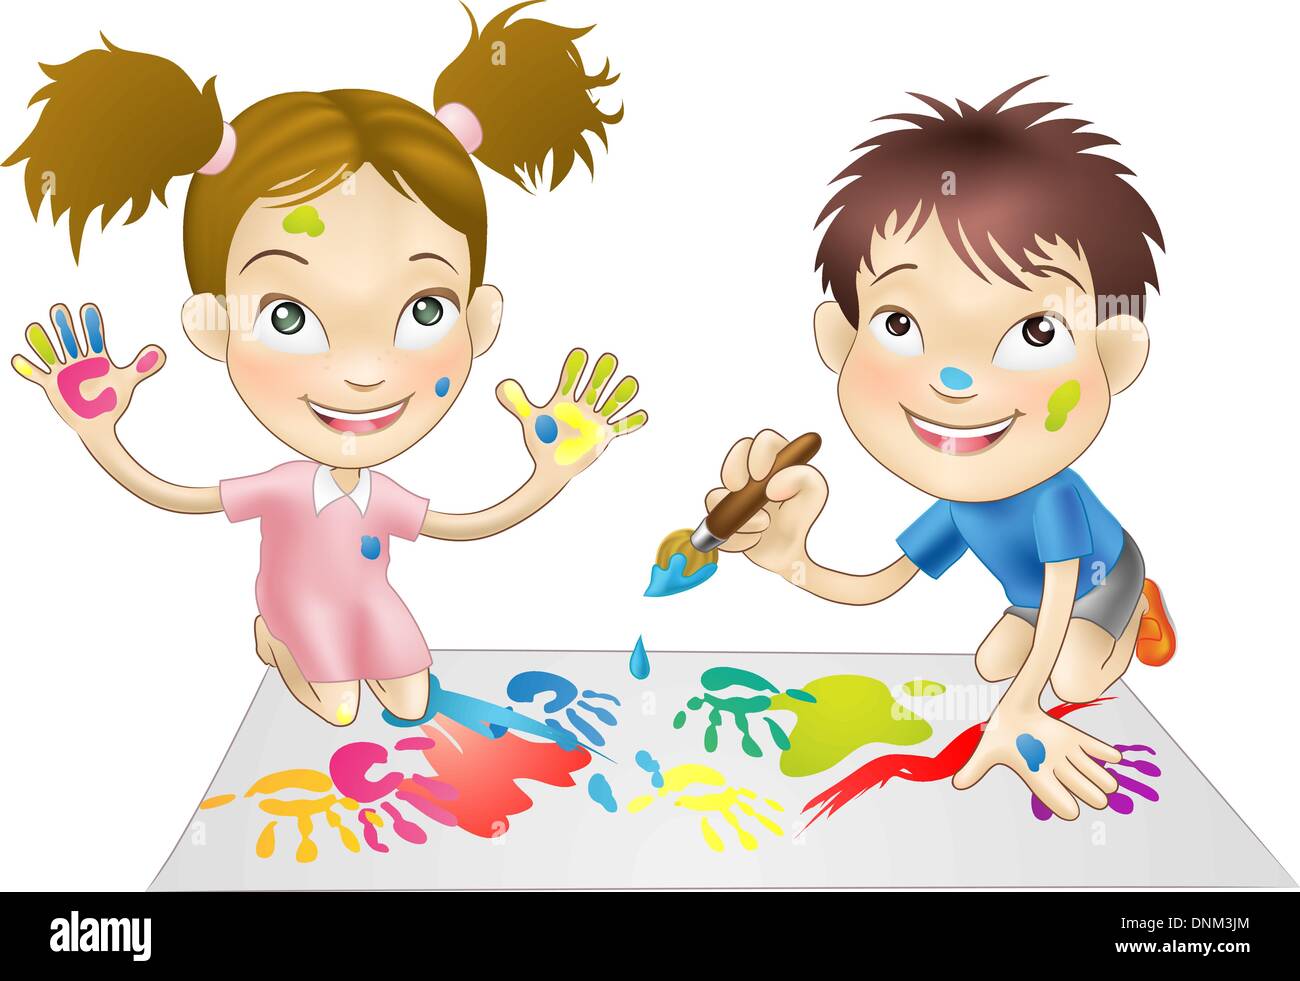 illustration of two young children playing with paints Stock Vector